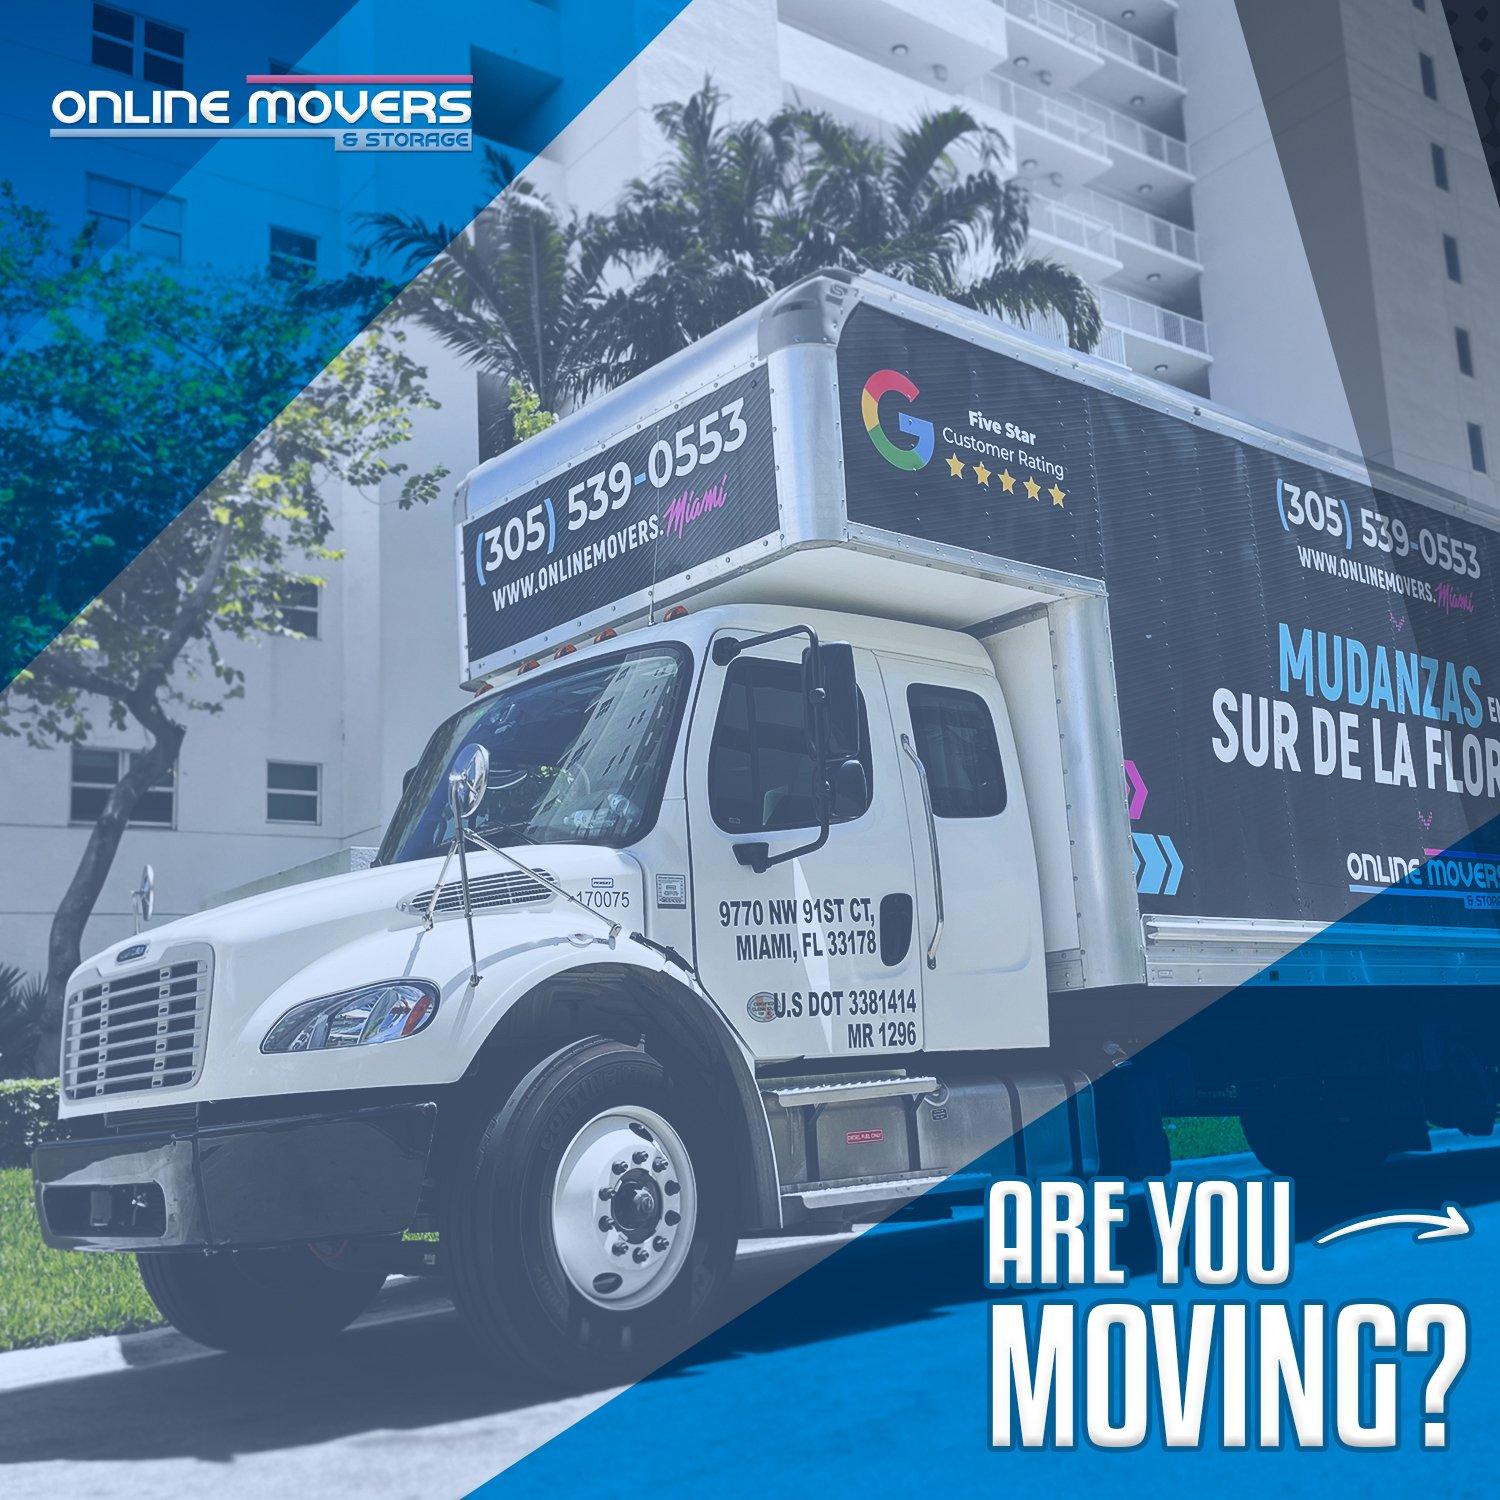 Professional Movers Service